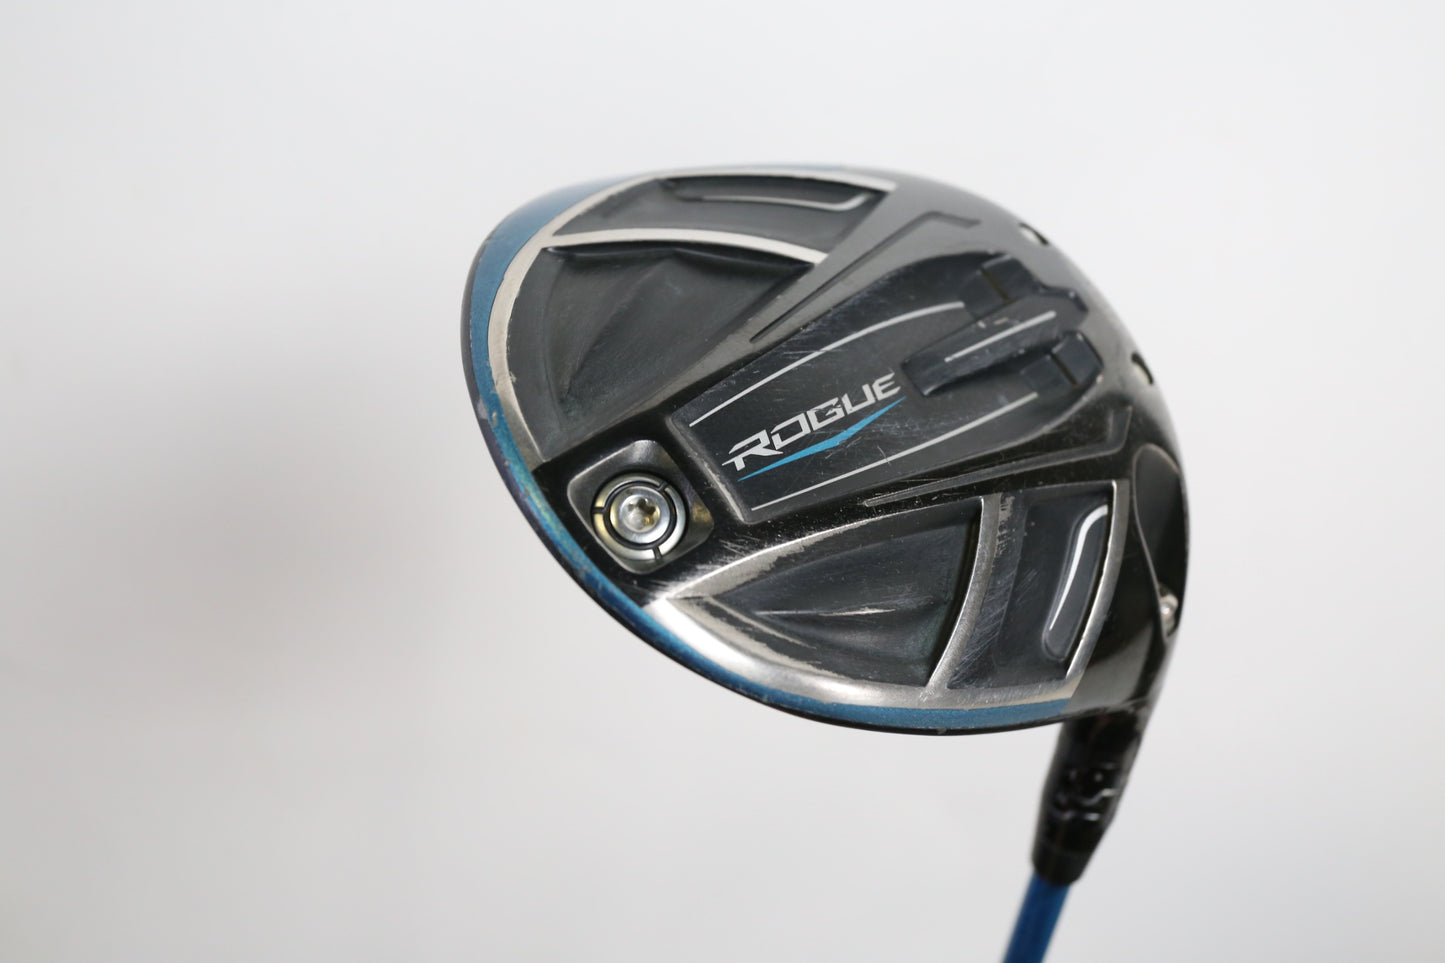 Used Callaway Rogue Driver - Right-Handed - 10.5 Degrees - Stiff Flex